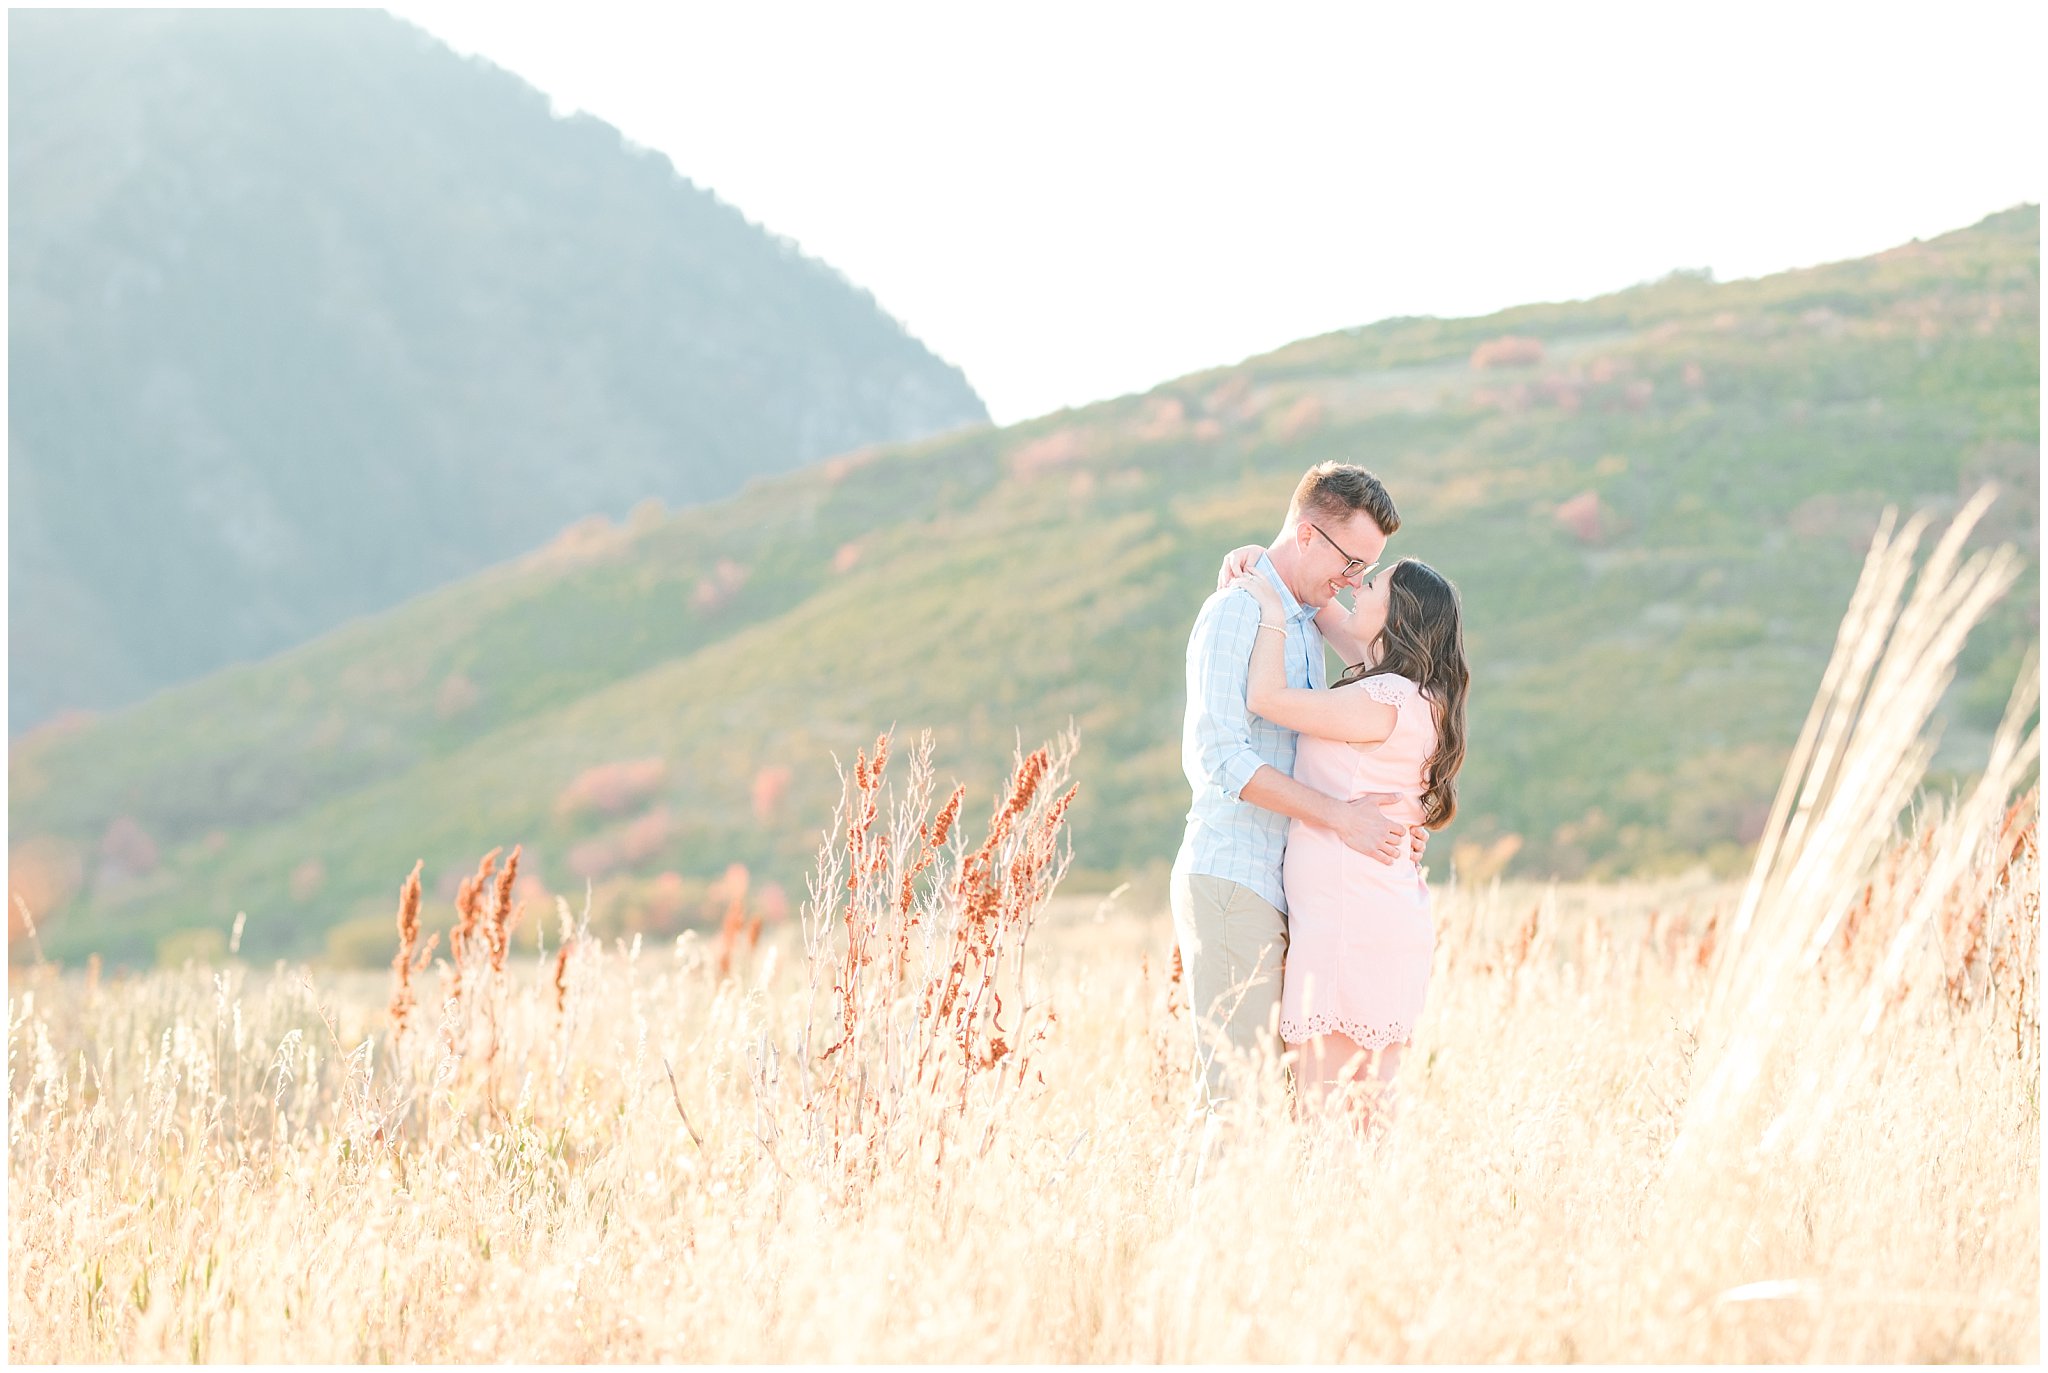 Couple in light blue shirt, tan pants and blush dress | Engagement in the Utah mountains surrounded by fall color | A Classic Snowbasin Fall Engagement Session | Jessie and Dallin Photography